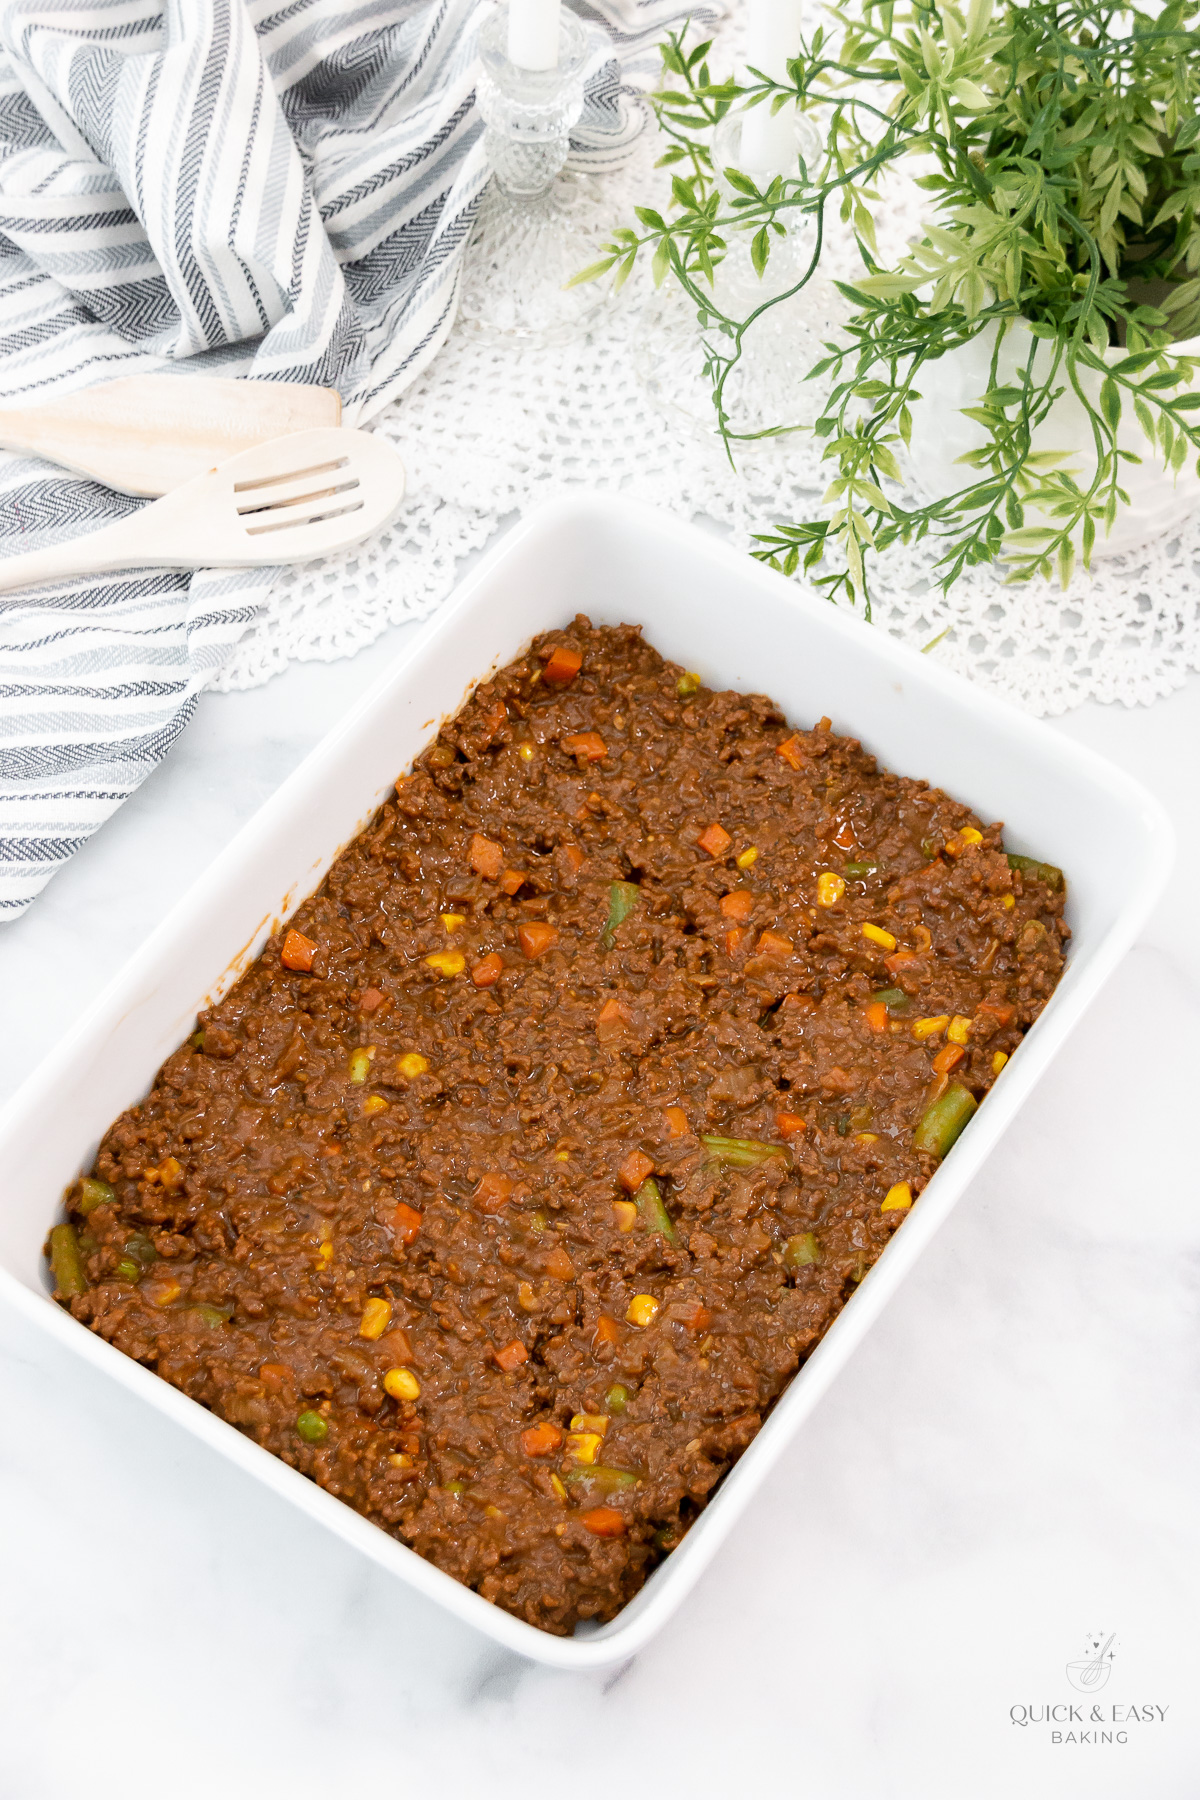 Beef mixture with gravy and vegetables in a white casserole dish.